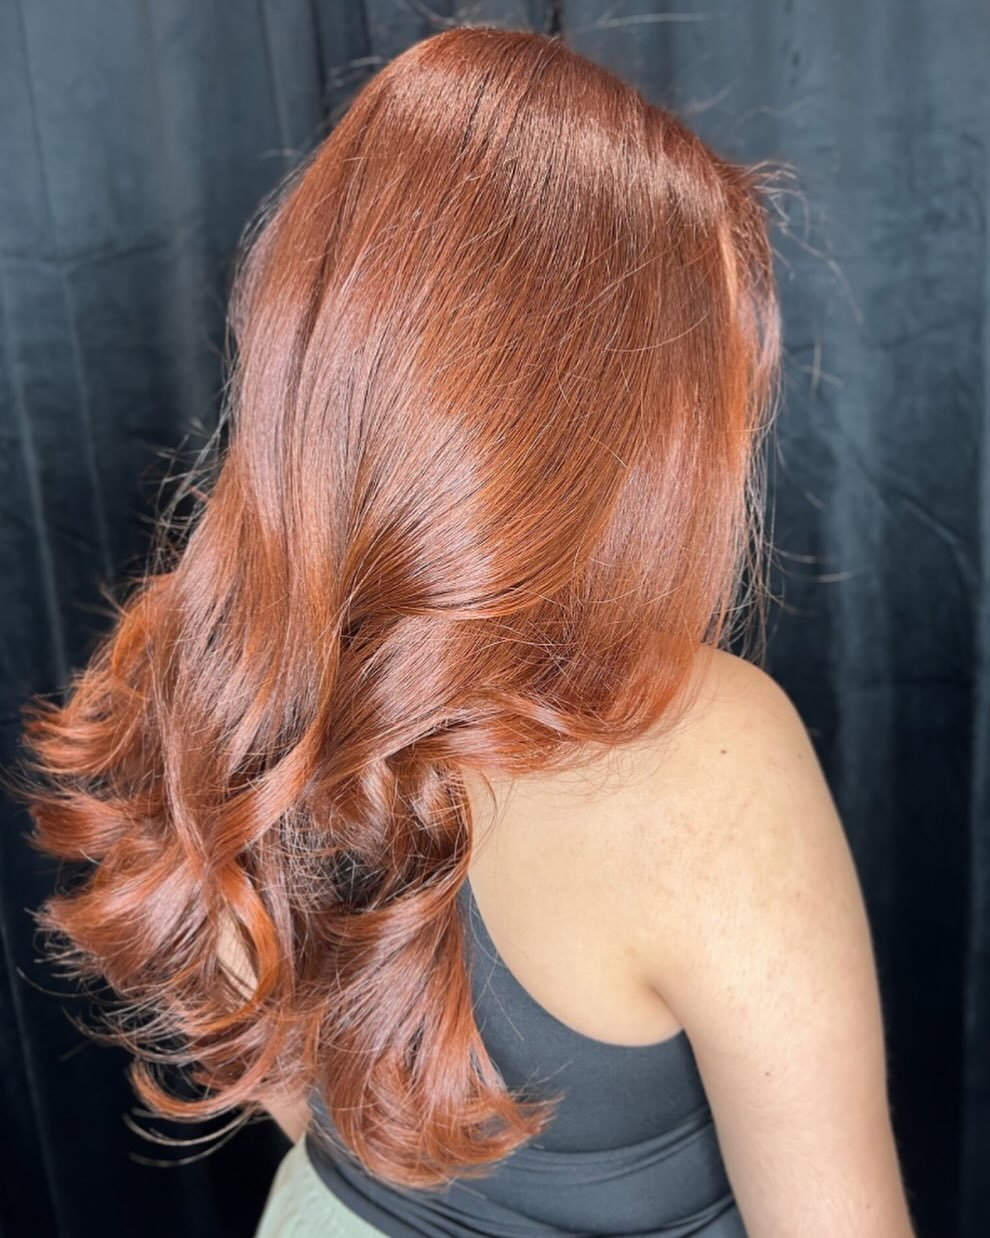 😮&zwj;💨Coming in HOT 🔥
Auburn hair color definitely has its place at The Ch&iacute;c House ALL 365 days of the year! 

✨Hair Artist: Zee

To reserve an appointment or consultation visit us on our website. We look forward to serving you!

www.lechi